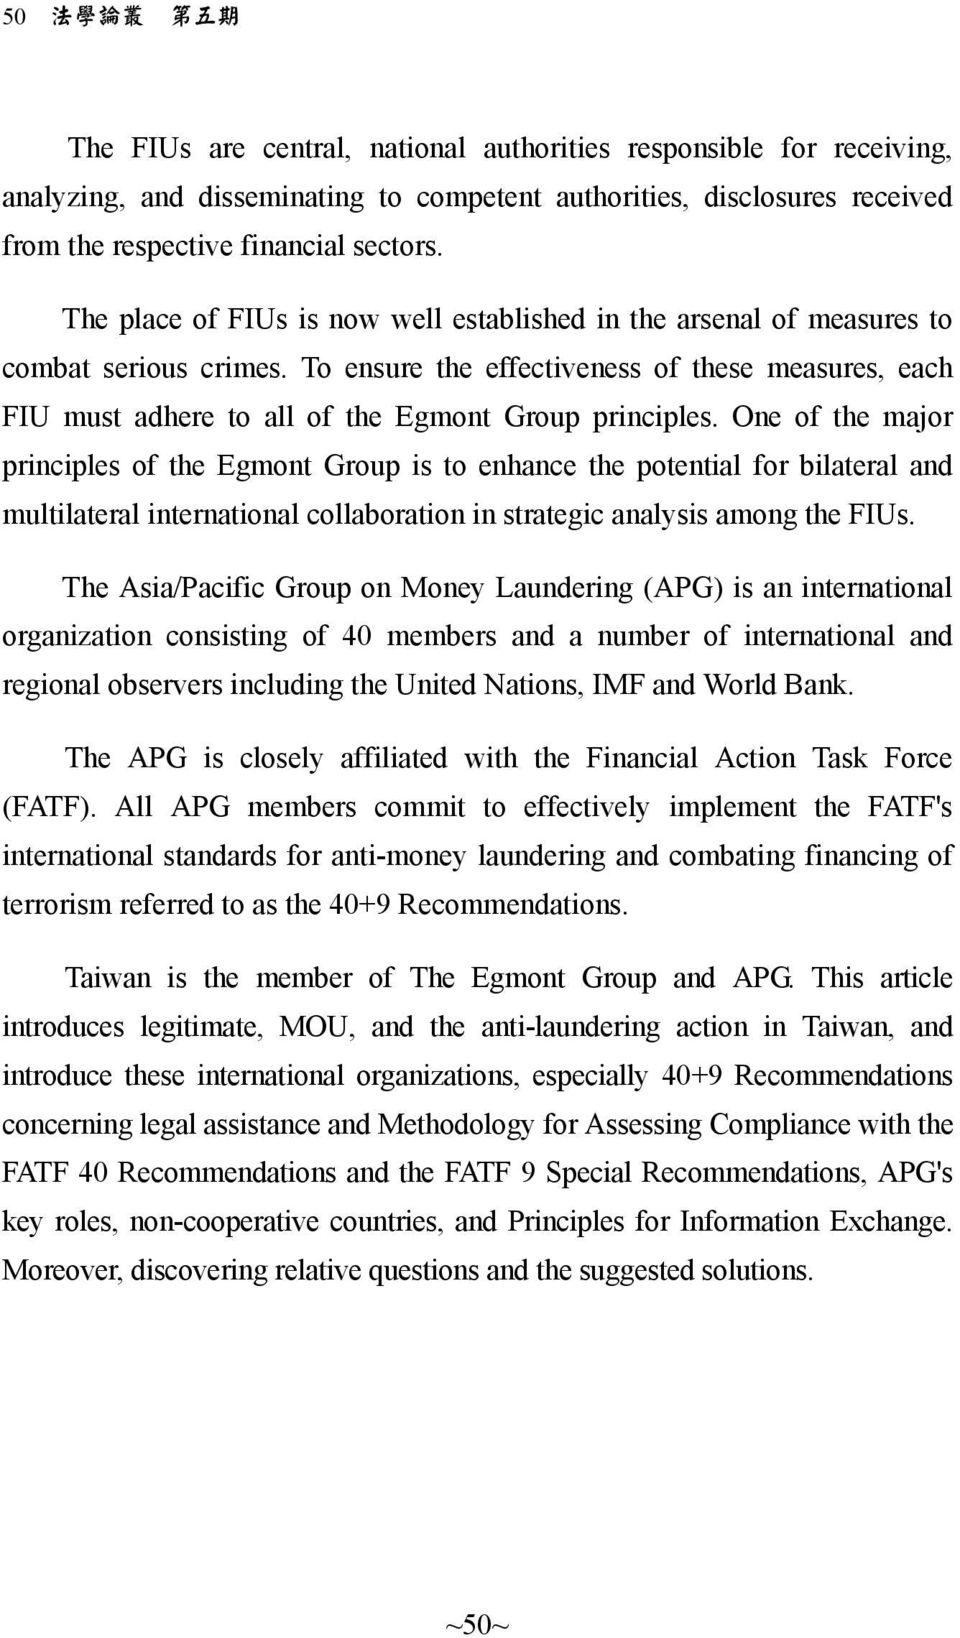 To ensure the effectiveness of these measures, each FIU must adhere to all of the Egmont Group principles.